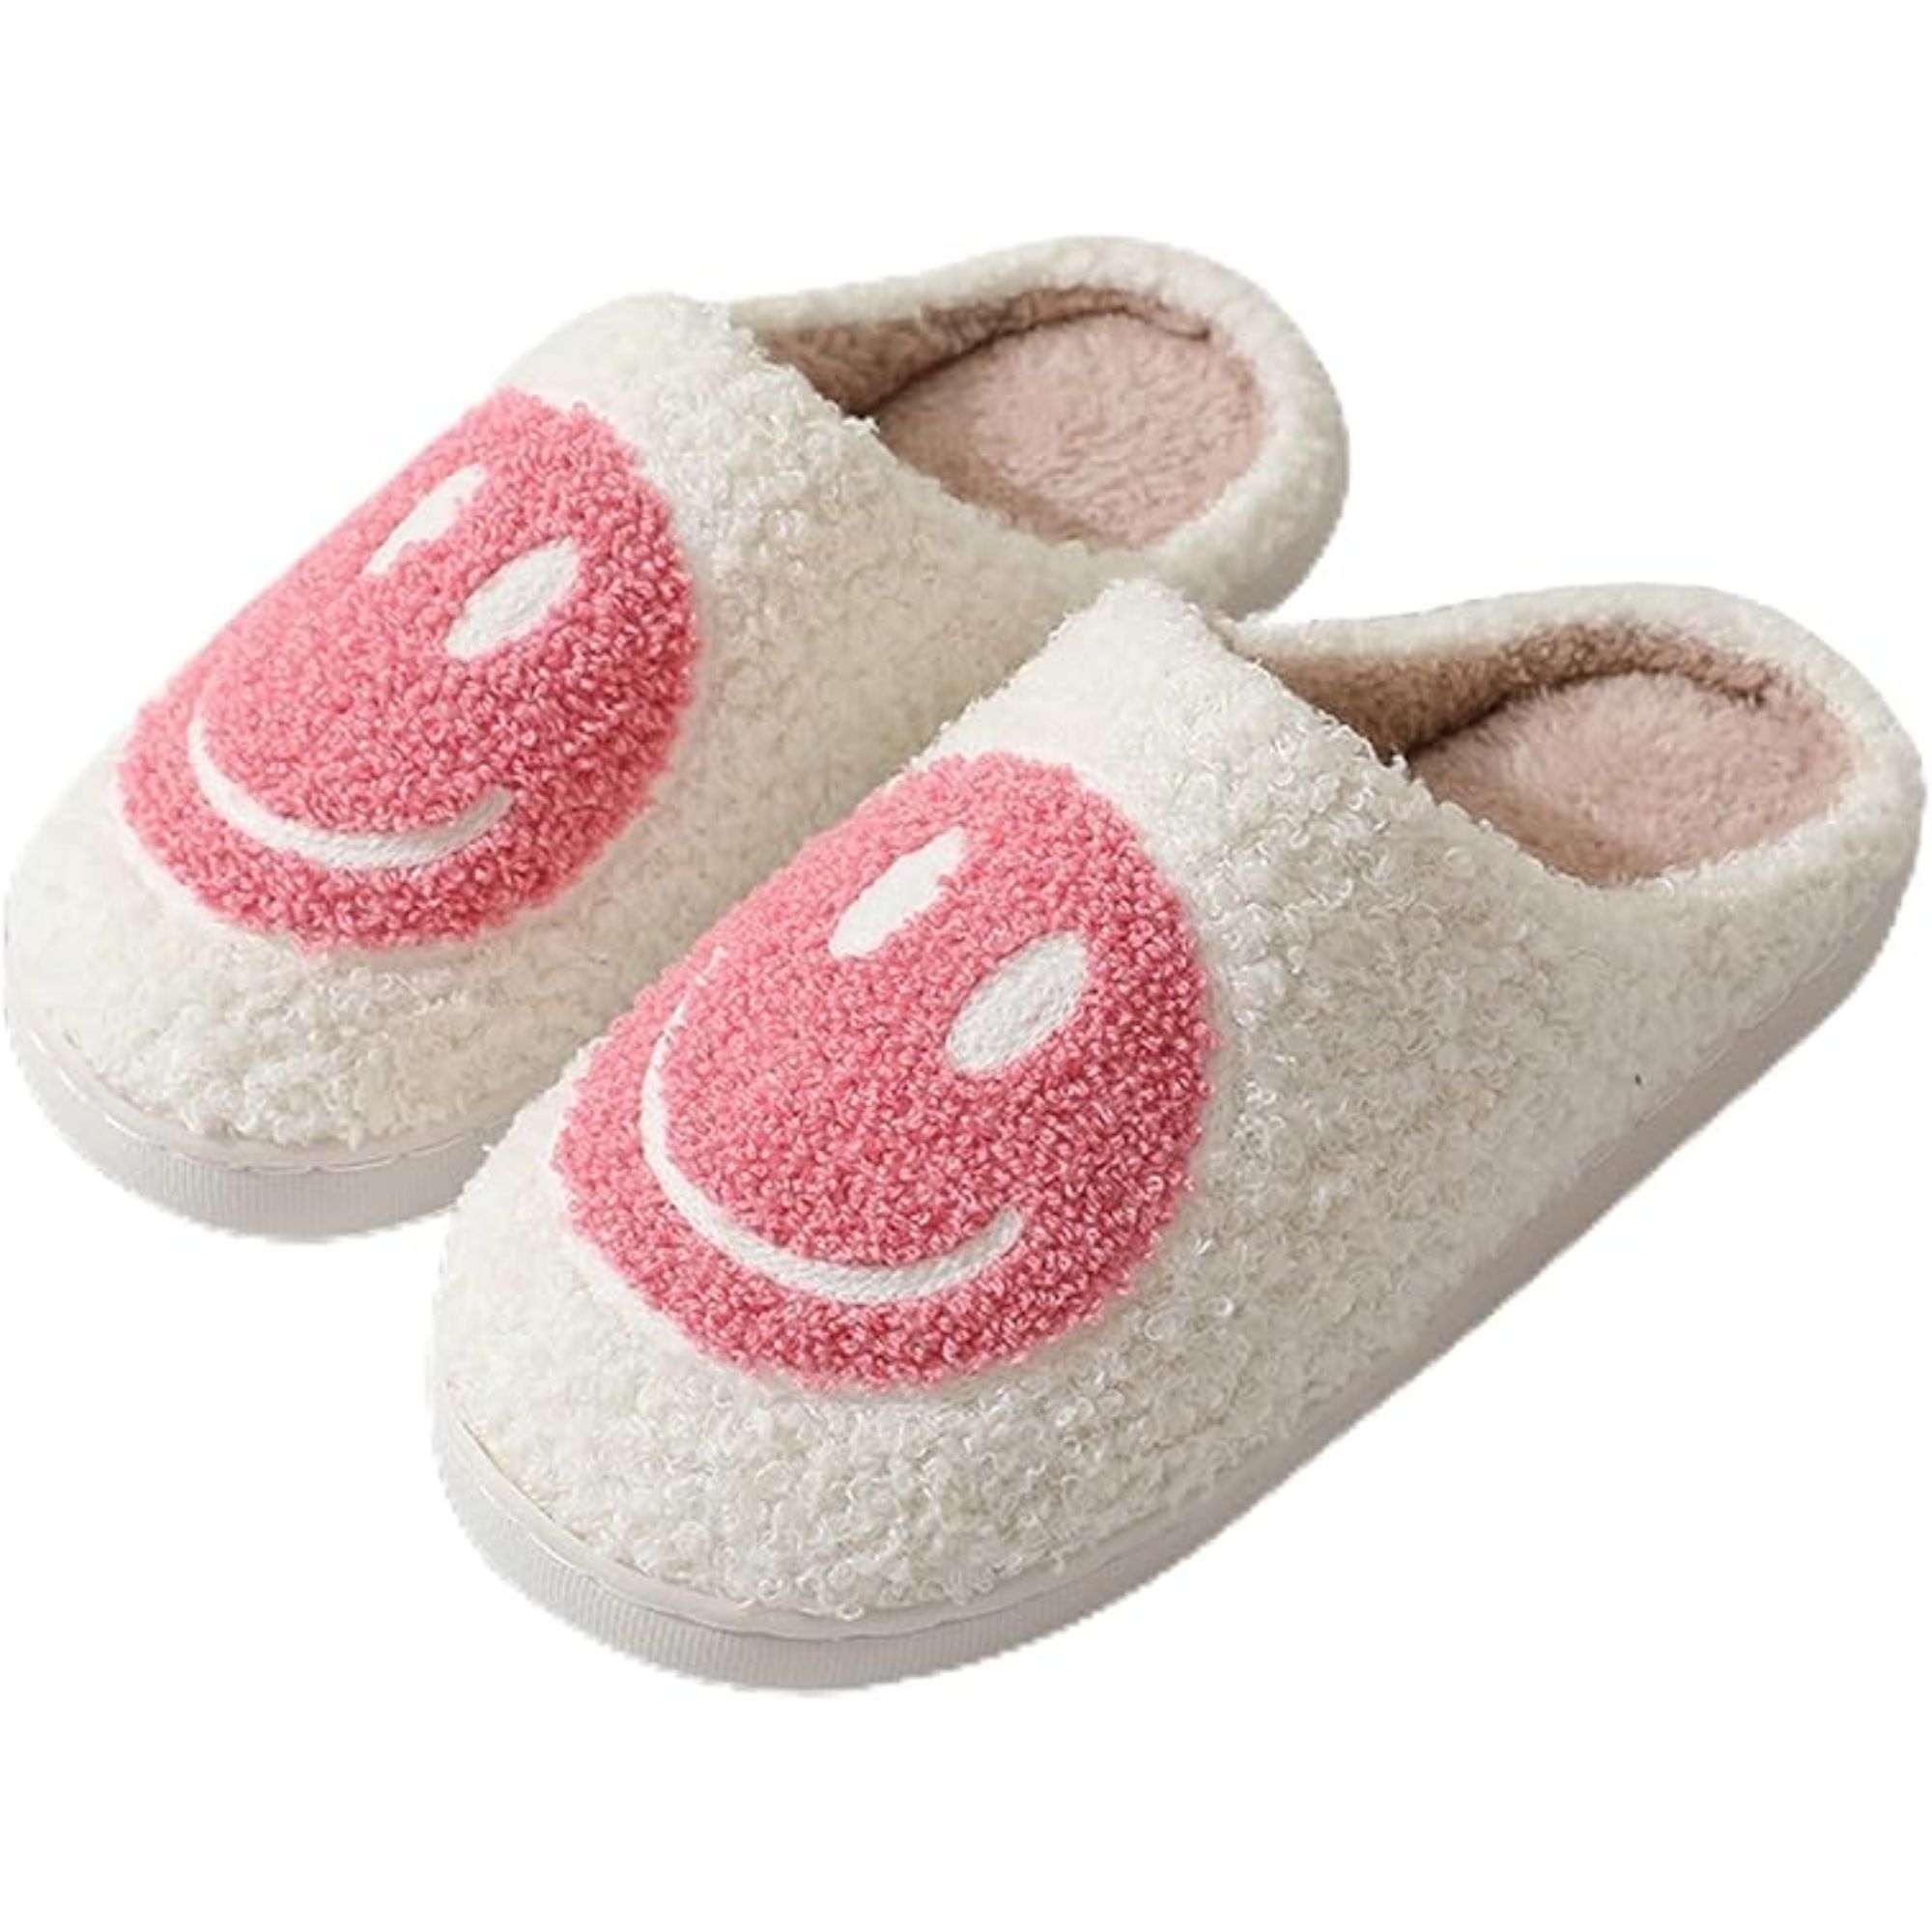 BERANMEY Cute Smile Face Slippers for Women Perfect Soft Plush Comfy Warm Slip-On Happy Face Slippers fo Women Indoor fluffy Smile House Slippers for Women and Men Non-slip Fuzzy Flat Slides - image 5 of 7